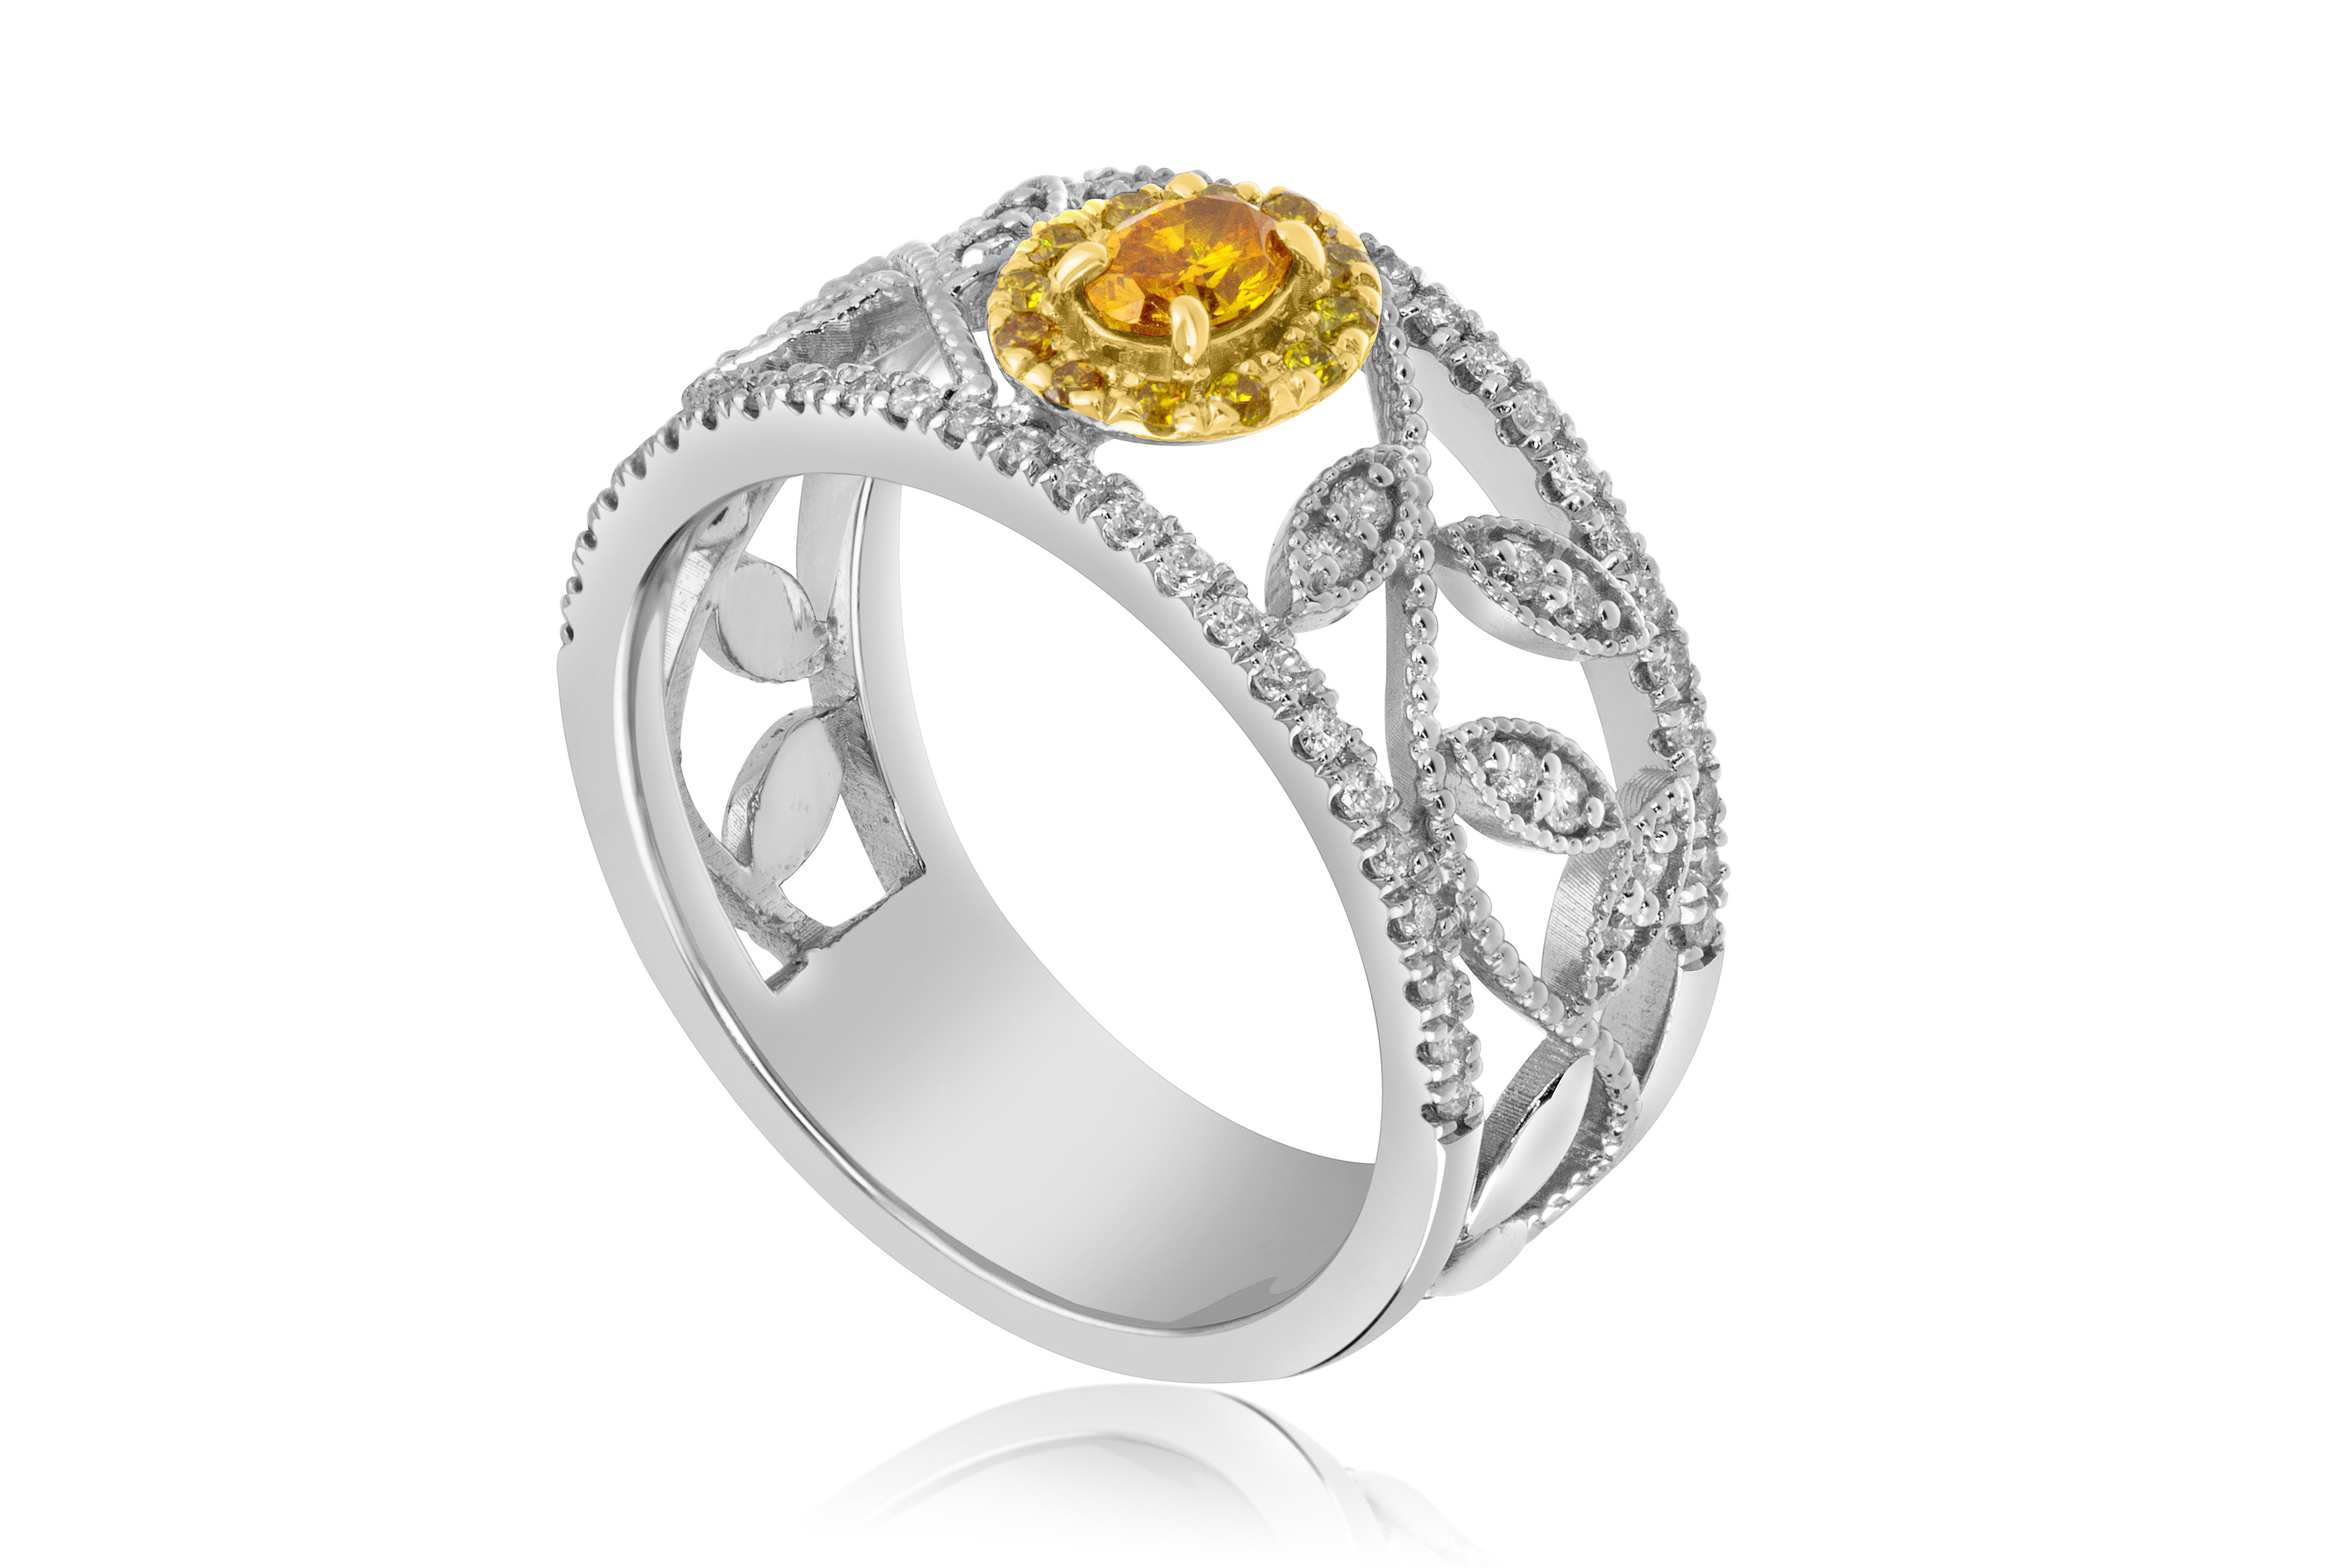 Enhance your style with this exquisite ring featuring a .18 carat fancy brownish orange-yellow diamond as its center stone. The unique color of the diamond adds a captivating and vibrant element to the ring, making it truly special.

The center